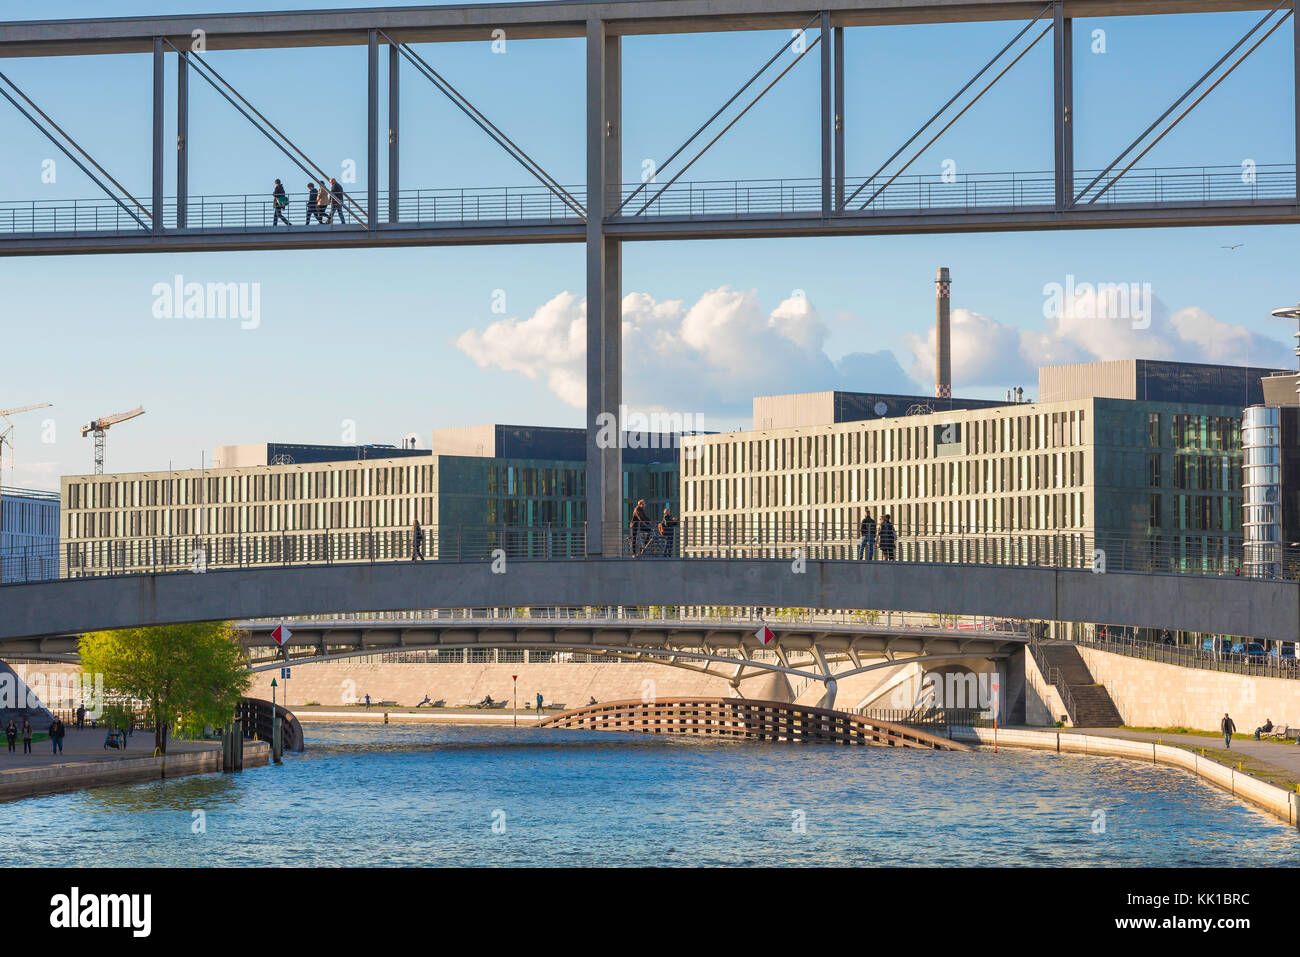 Berlin architecture, view of the Regierungsviertel government quarter in the Mitte district of Berlin with bridges spanning the Spree river, Germany Stock Photo